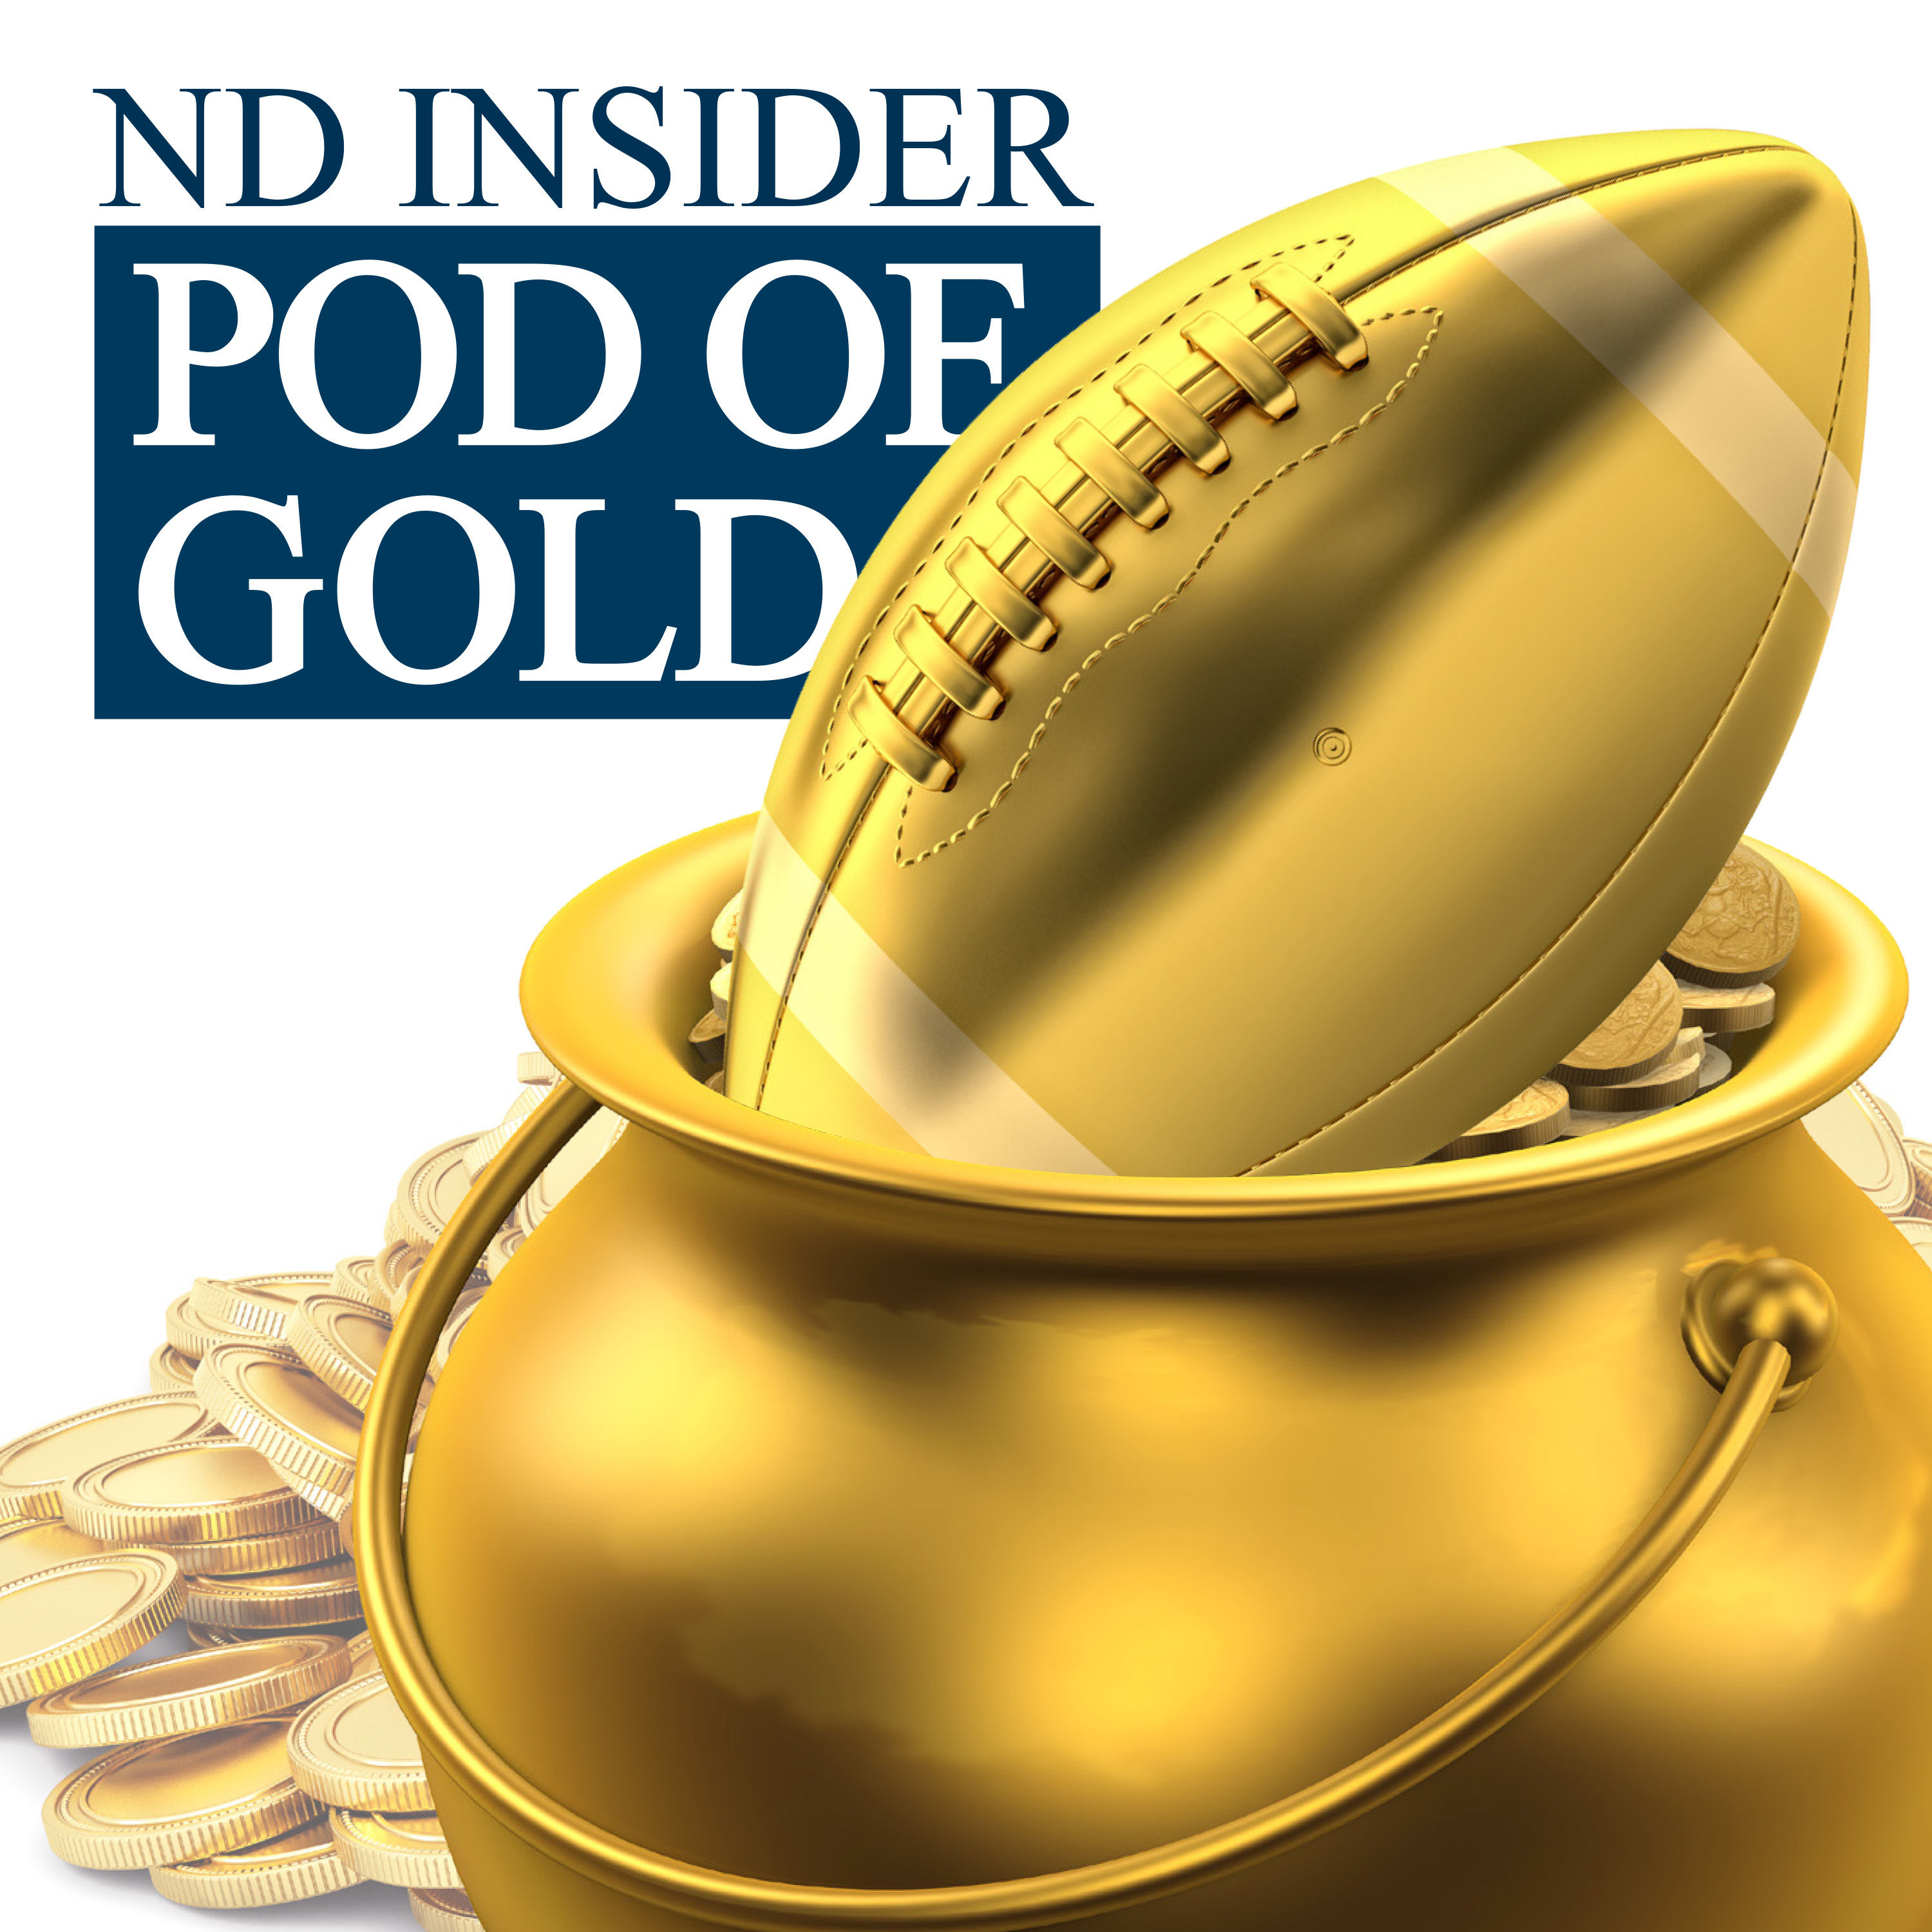 Too early to talk Notre Dame-Ohio State? Nah. Columbus Dispatch columnist Rob Oller joins the Pod of Gold